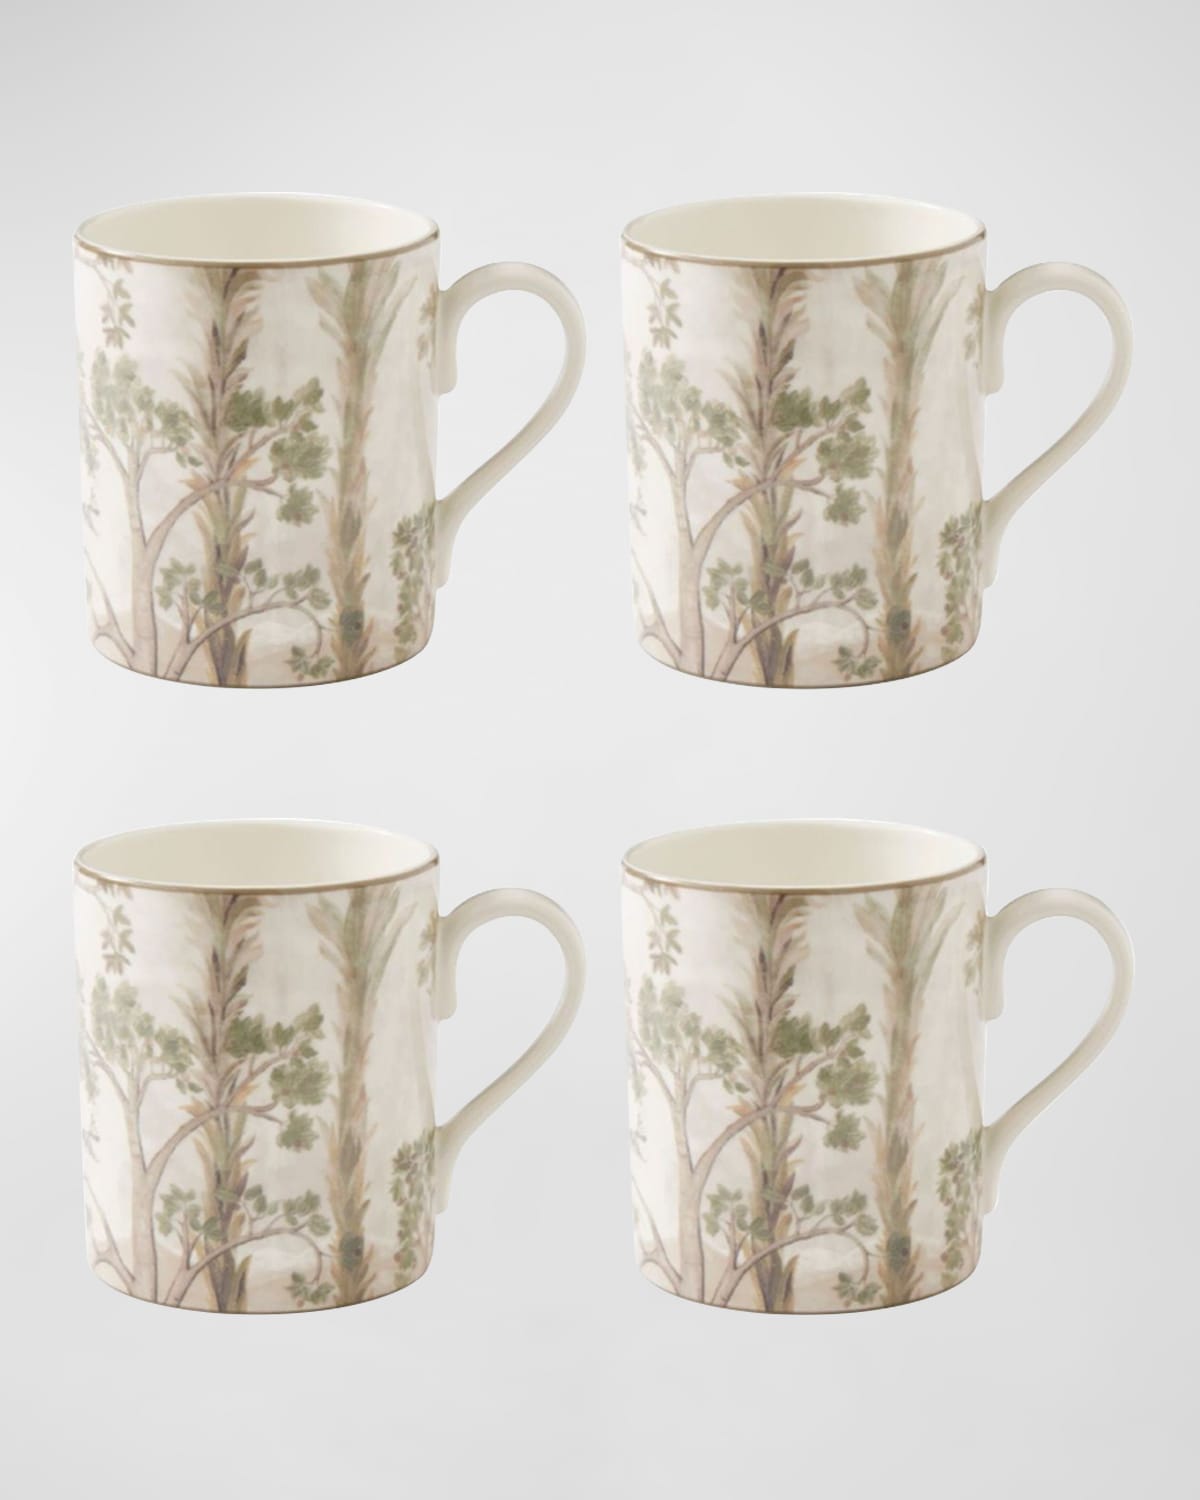 Kit Kemp For Spode Tall Trees Mug, Set Of 4 In Assorted Colors